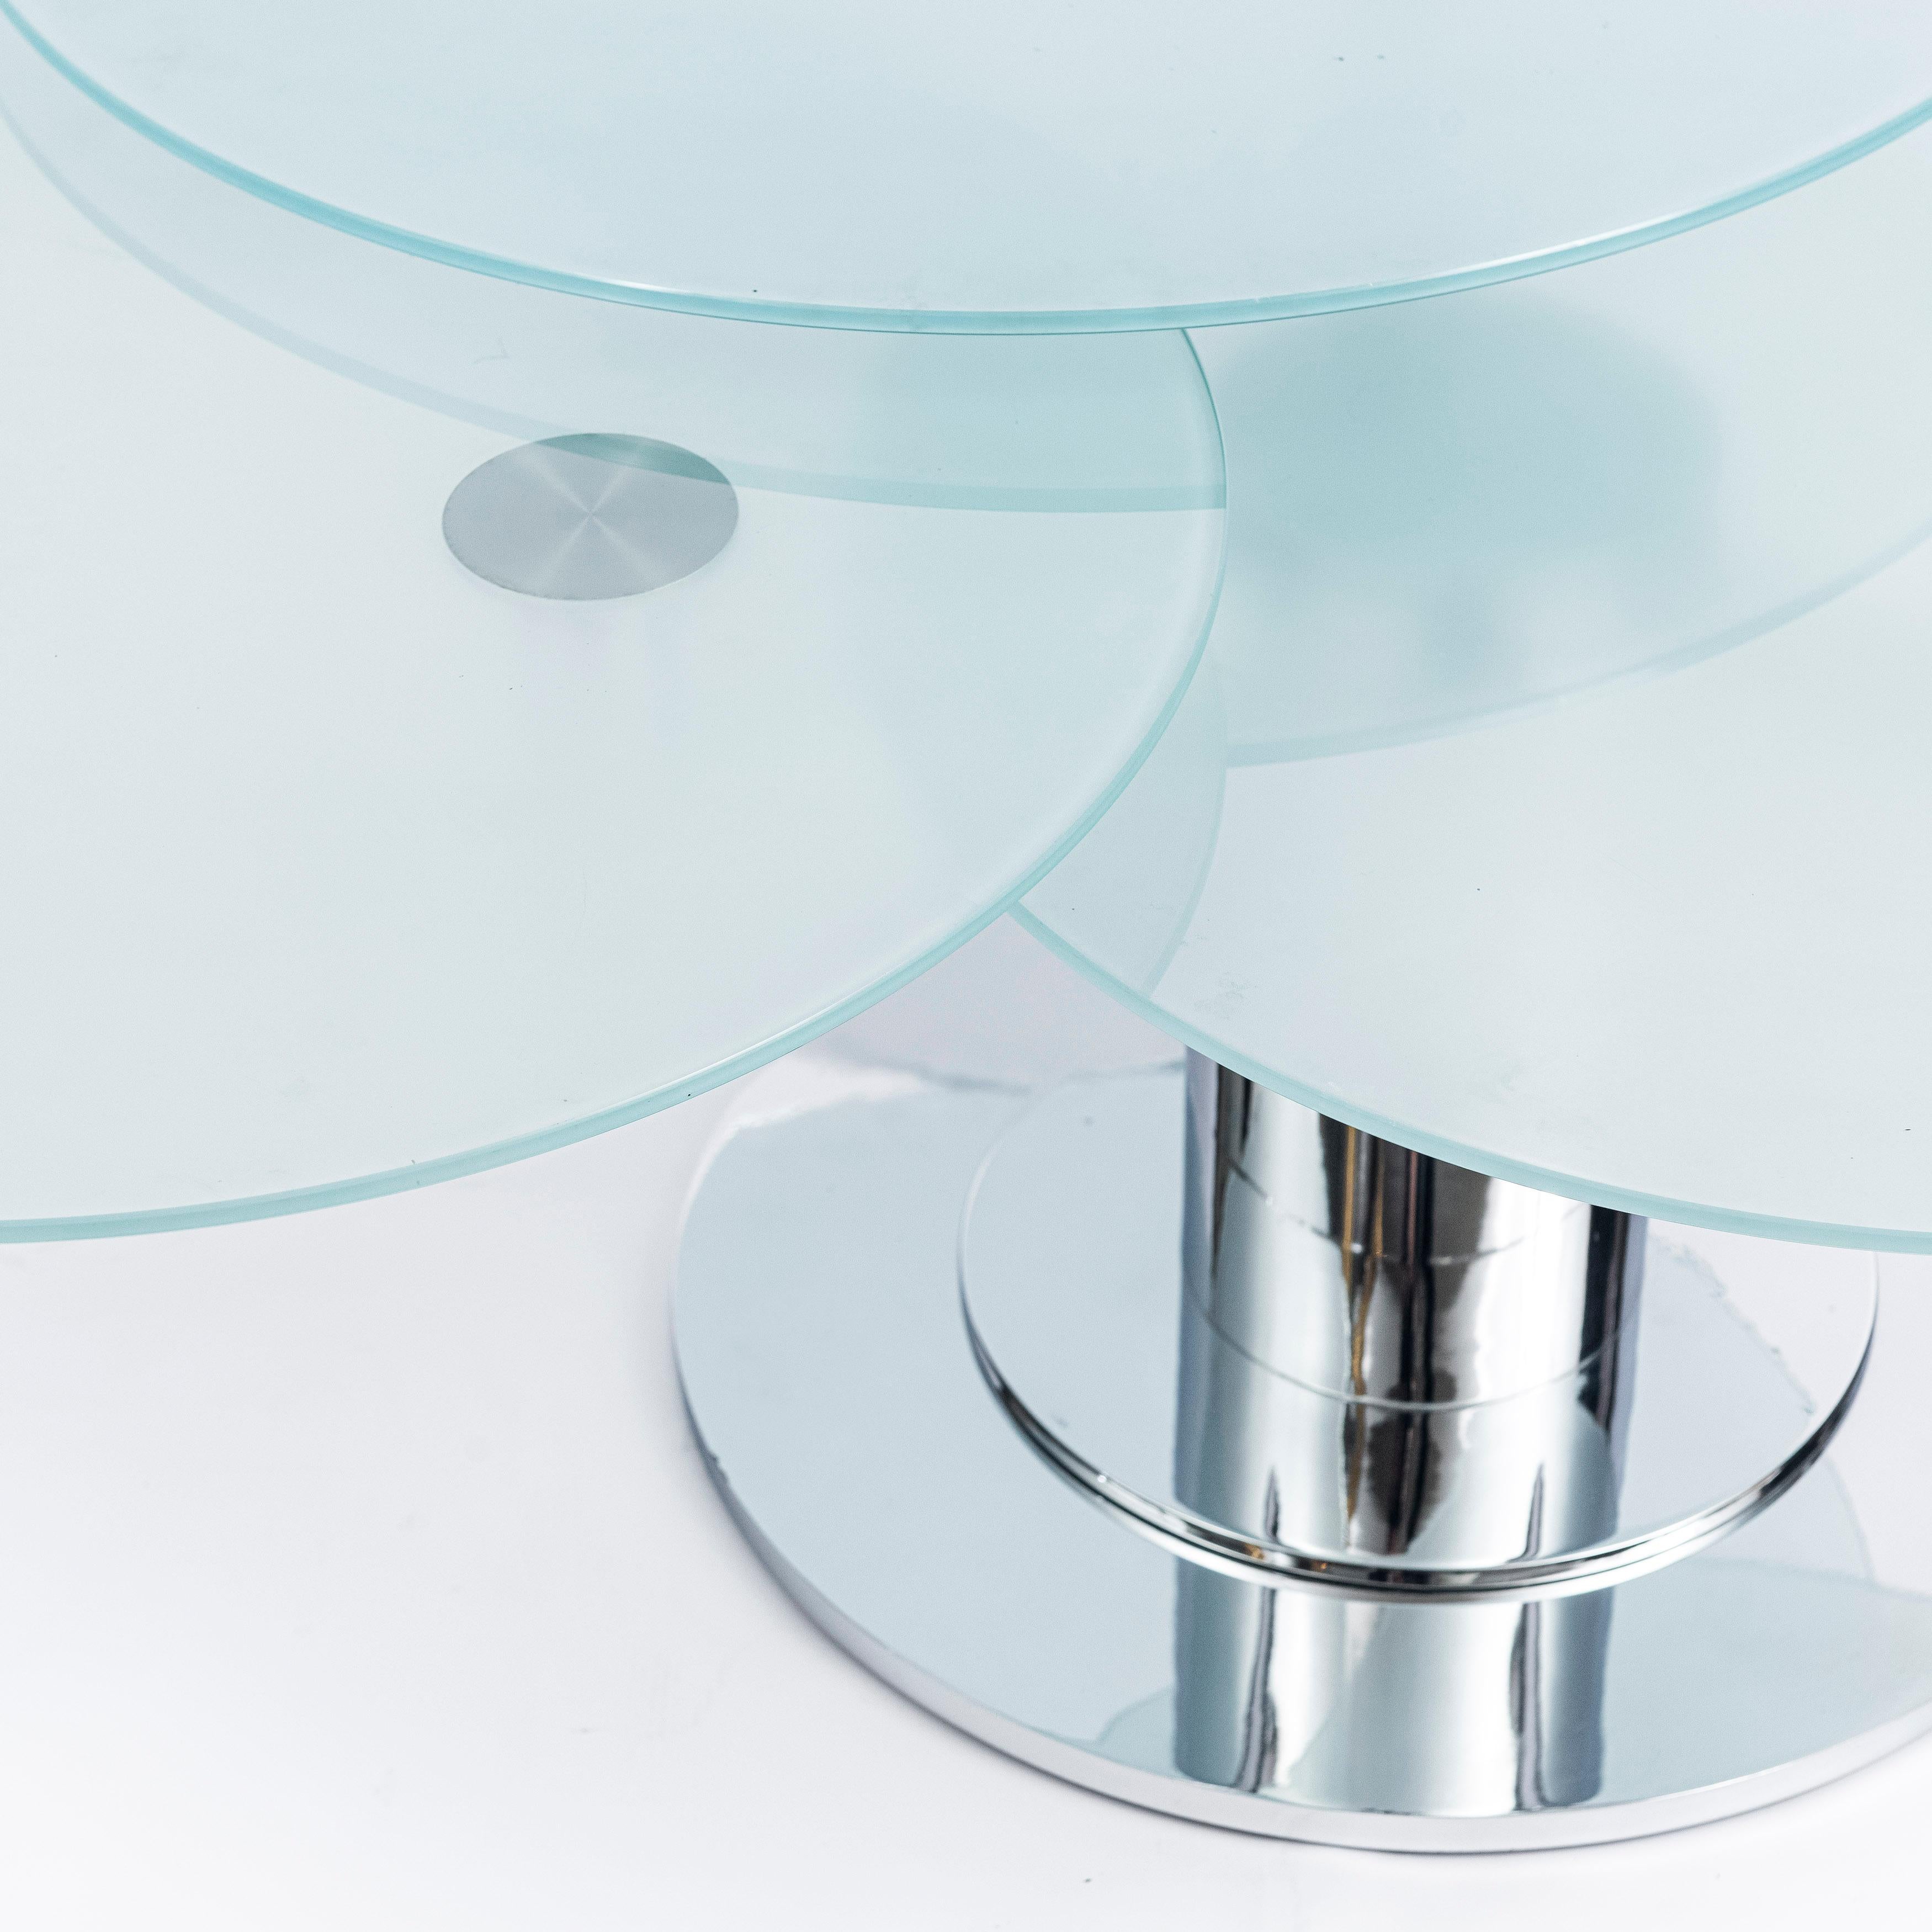 Round glass and chrome metal adjustable coffee table. Italy, circa 1980.

Dimensions open: 135 cm width, 105 cm depth, 45 cm height.
Dimensions close: 100 cm width, 95 cm depth, 45 cm height.